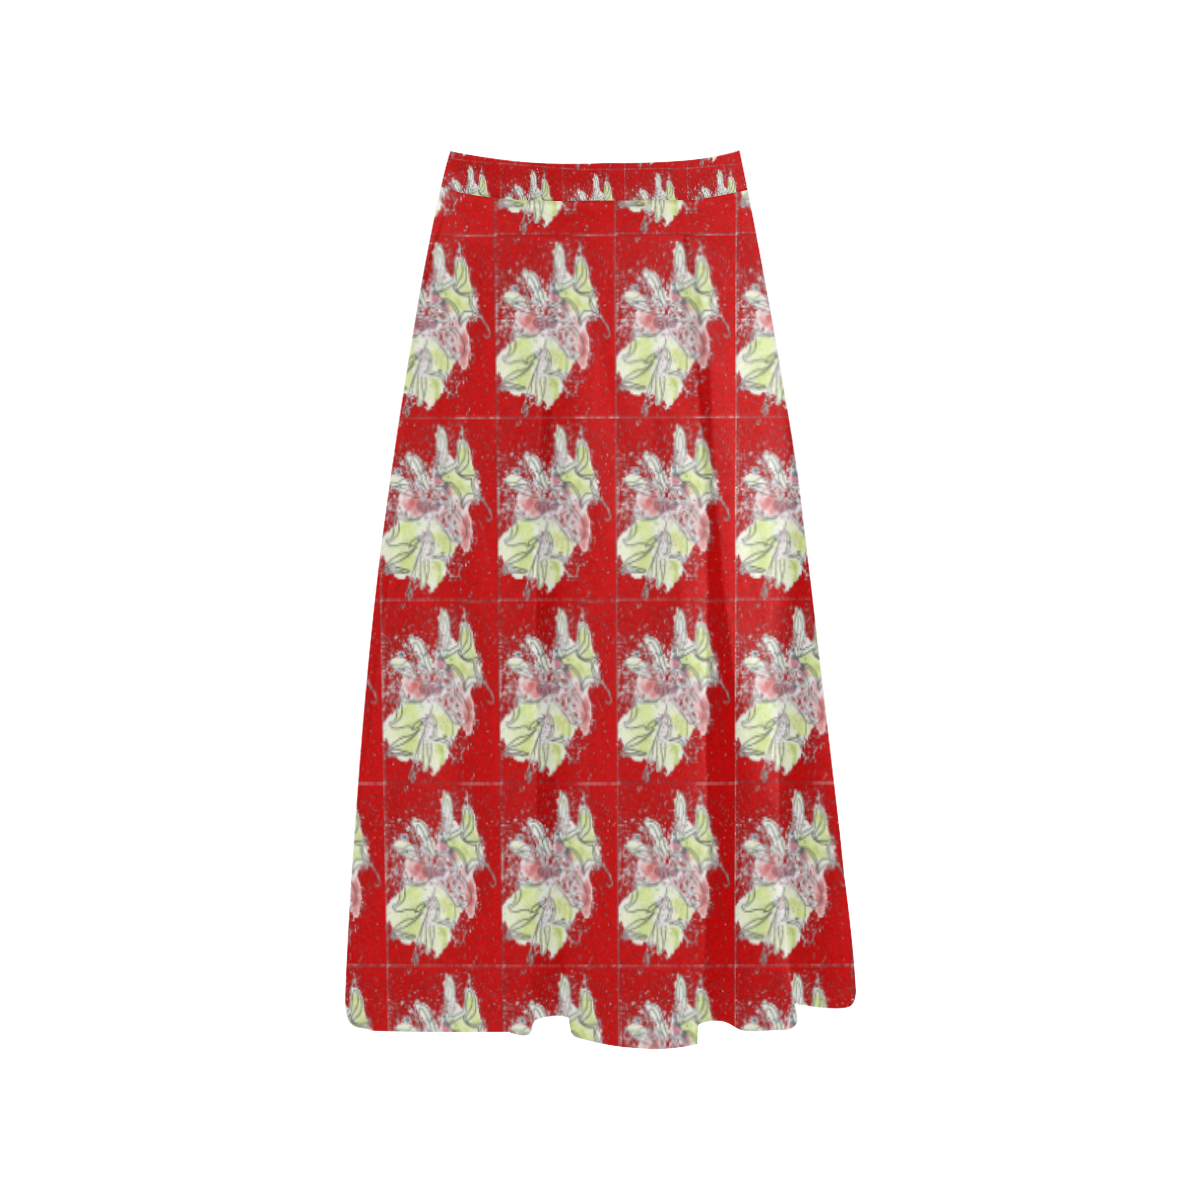 Red Crepe Skirt with Christmas Motif Aoede Crepe Skirt (Model D16)